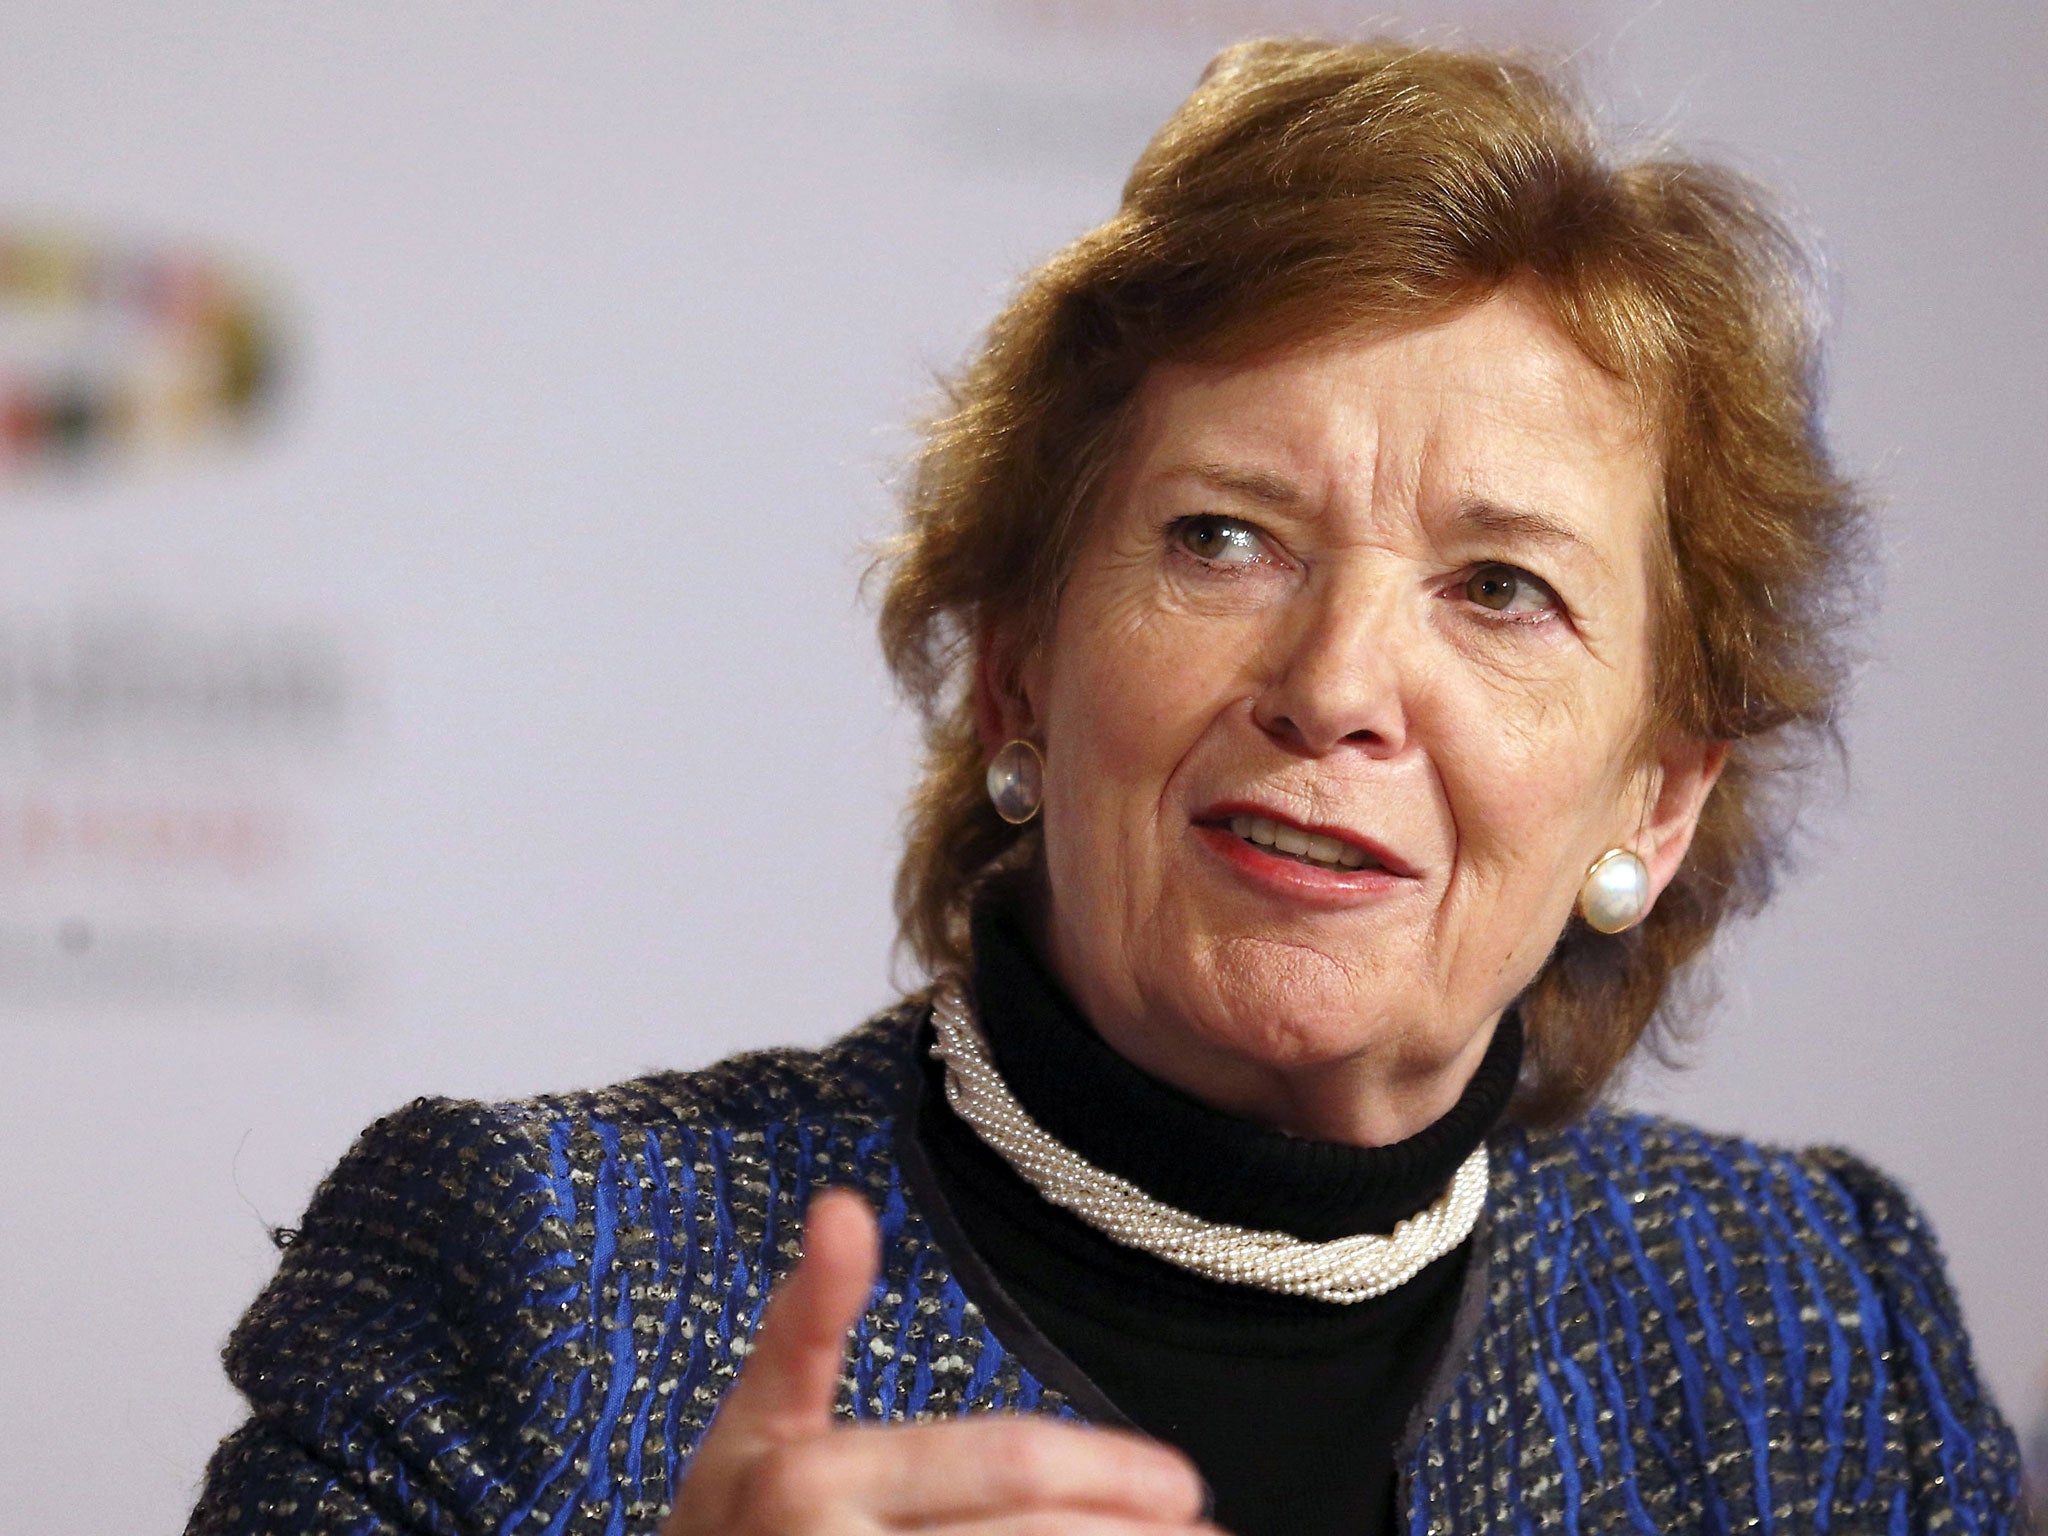 In the Princess Latifa affair, Mary Robinson has willingly tarnished her reputation for Dubai’s regime